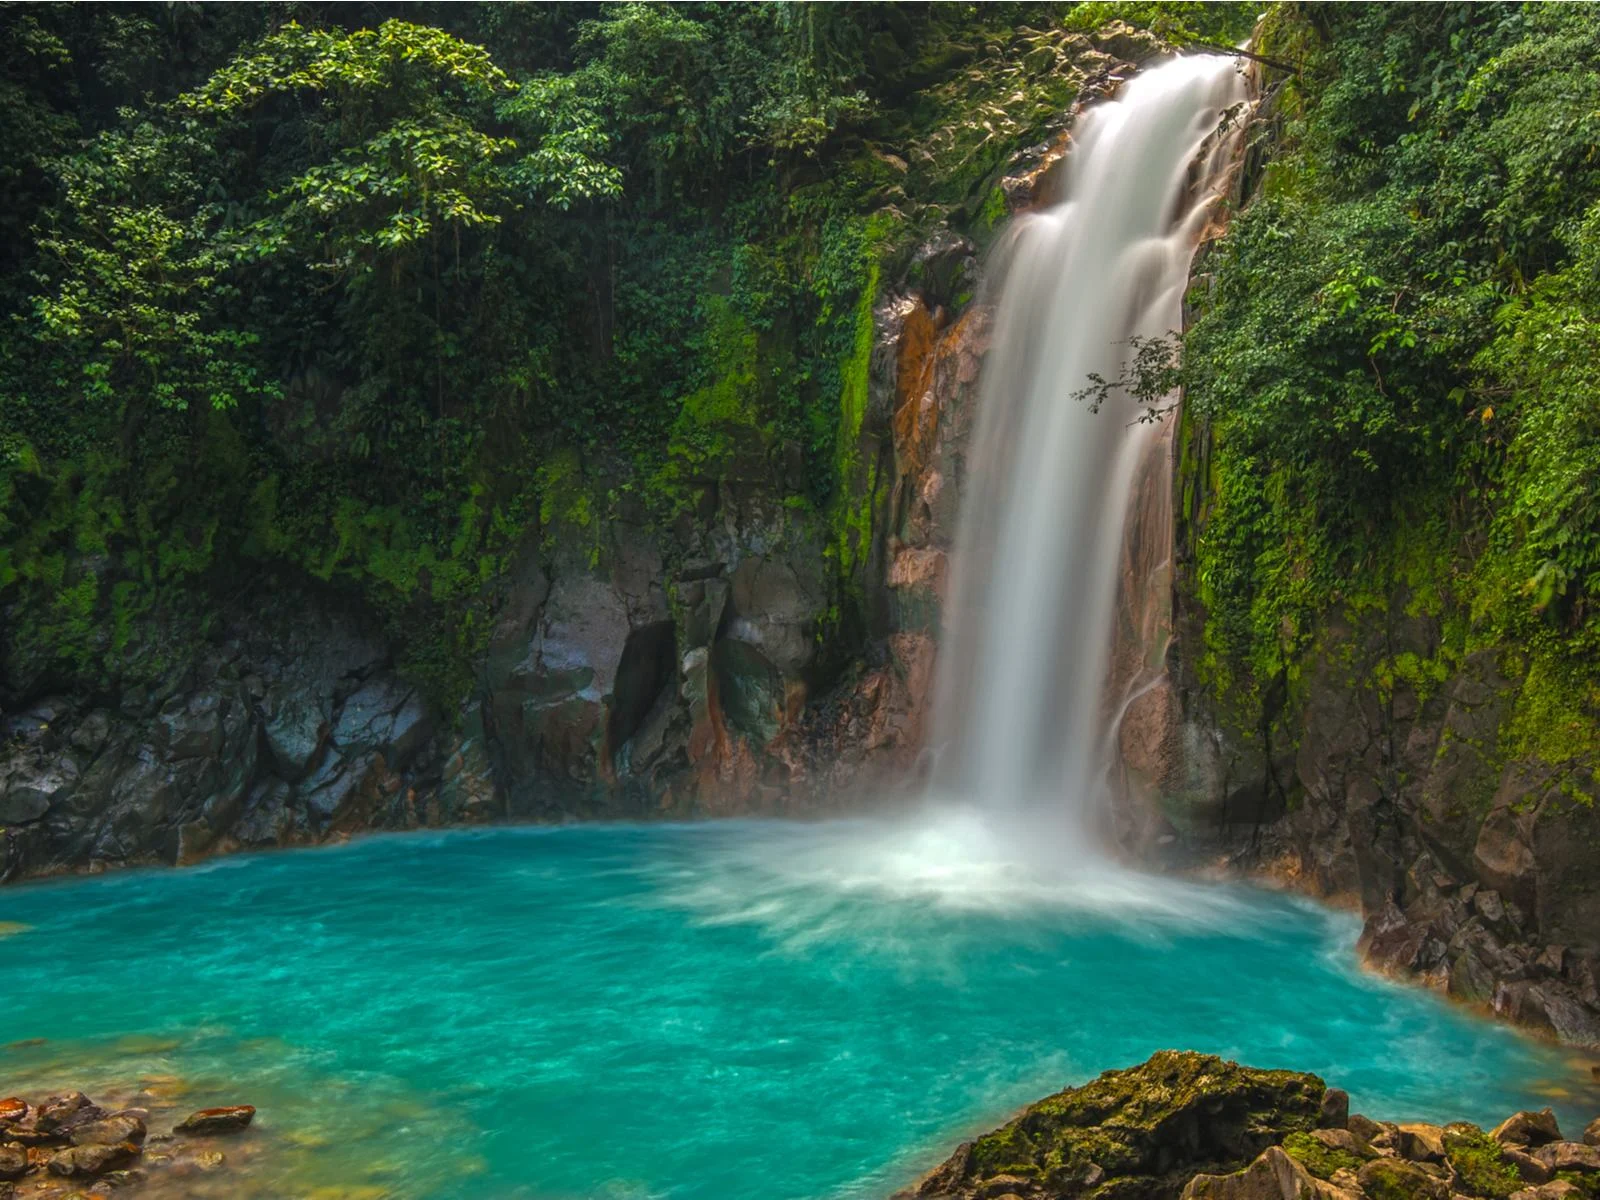 Surreal Rio Celeste Waterfall, one of the best things to do in Costa Rica, with pristine greeneries and moss-covered rocks